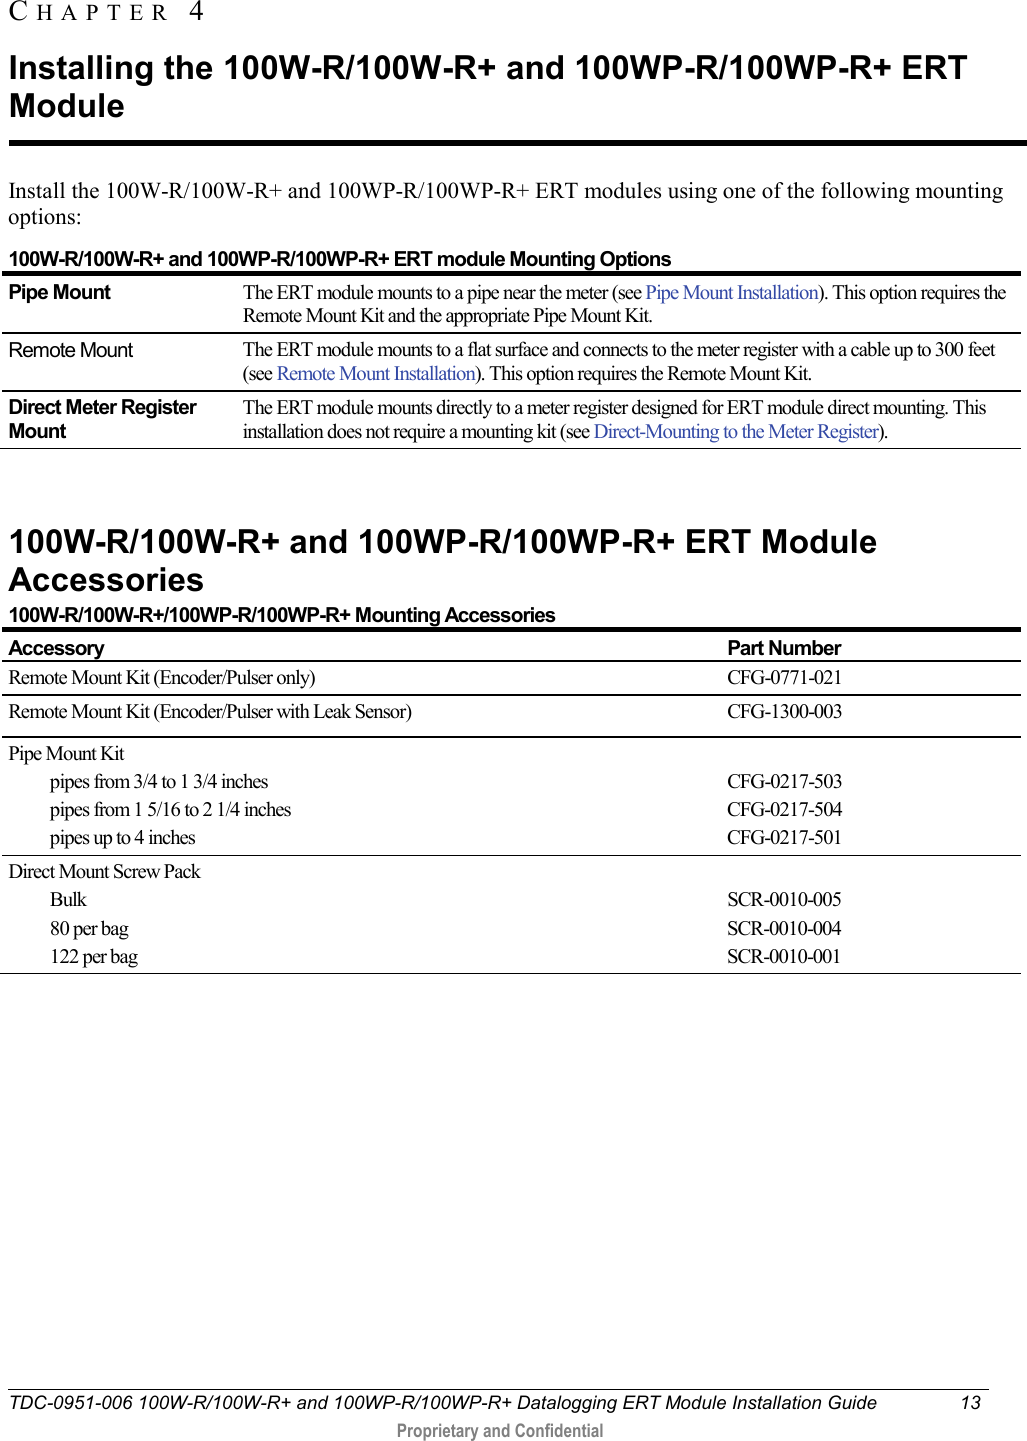  TDC-0951-006 100W-R/100W-R+ and 100WP-R/100WP-R+ Datalogging ERT Module Installation Guide 13   Proprietary and Confidential     Install the 100W-R/100W-R+ and 100WP-R/100WP-R+ ERT modules using one of the following mounting options: 100W-R/100W-R+ and 100WP-R/100WP-R+ ERT module Mounting Options Pipe Mount The ERT module mounts to a pipe near the meter (see Pipe Mount Installation). This option requires the Remote Mount Kit and the appropriate Pipe Mount Kit. Remote Mount The ERT module mounts to a flat surface and connects to the meter register with a cable up to 300 feet (see Remote Mount Installation). This option requires the Remote Mount Kit. Direct Meter Register Mount The ERT module mounts directly to a meter register designed for ERT module direct mounting. This installation does not require a mounting kit (see Direct-Mounting to the Meter Register).      100W-R/100W-R+ and 100WP-R/100WP-R+ ERT Module Accessories 100W-R/100W-R+/100WP-R/100WP-R+ Mounting Accessories Accessory Part Number Remote Mount Kit (Encoder/Pulser only) CFG-0771-021 Remote Mount Kit (Encoder/Pulser with Leak Sensor) CFG-1300-003 Pipe Mount Kit pipes from 3/4 to 1 3/4 inches pipes from 1 5/16 to 2 1/4 inches pipes up to 4 inches  CFG-0217-503 CFG-0217-504 CFG-0217-501 Direct Mount Screw Pack Bulk 80 per bag 122 per bag  SCR-0010-005  SCR-0010-004 SCR-0010-001   CHAPTER  4  Installing the 100W-R/100W-R+ and 100WP-R/100WP-R+ ERT Module 